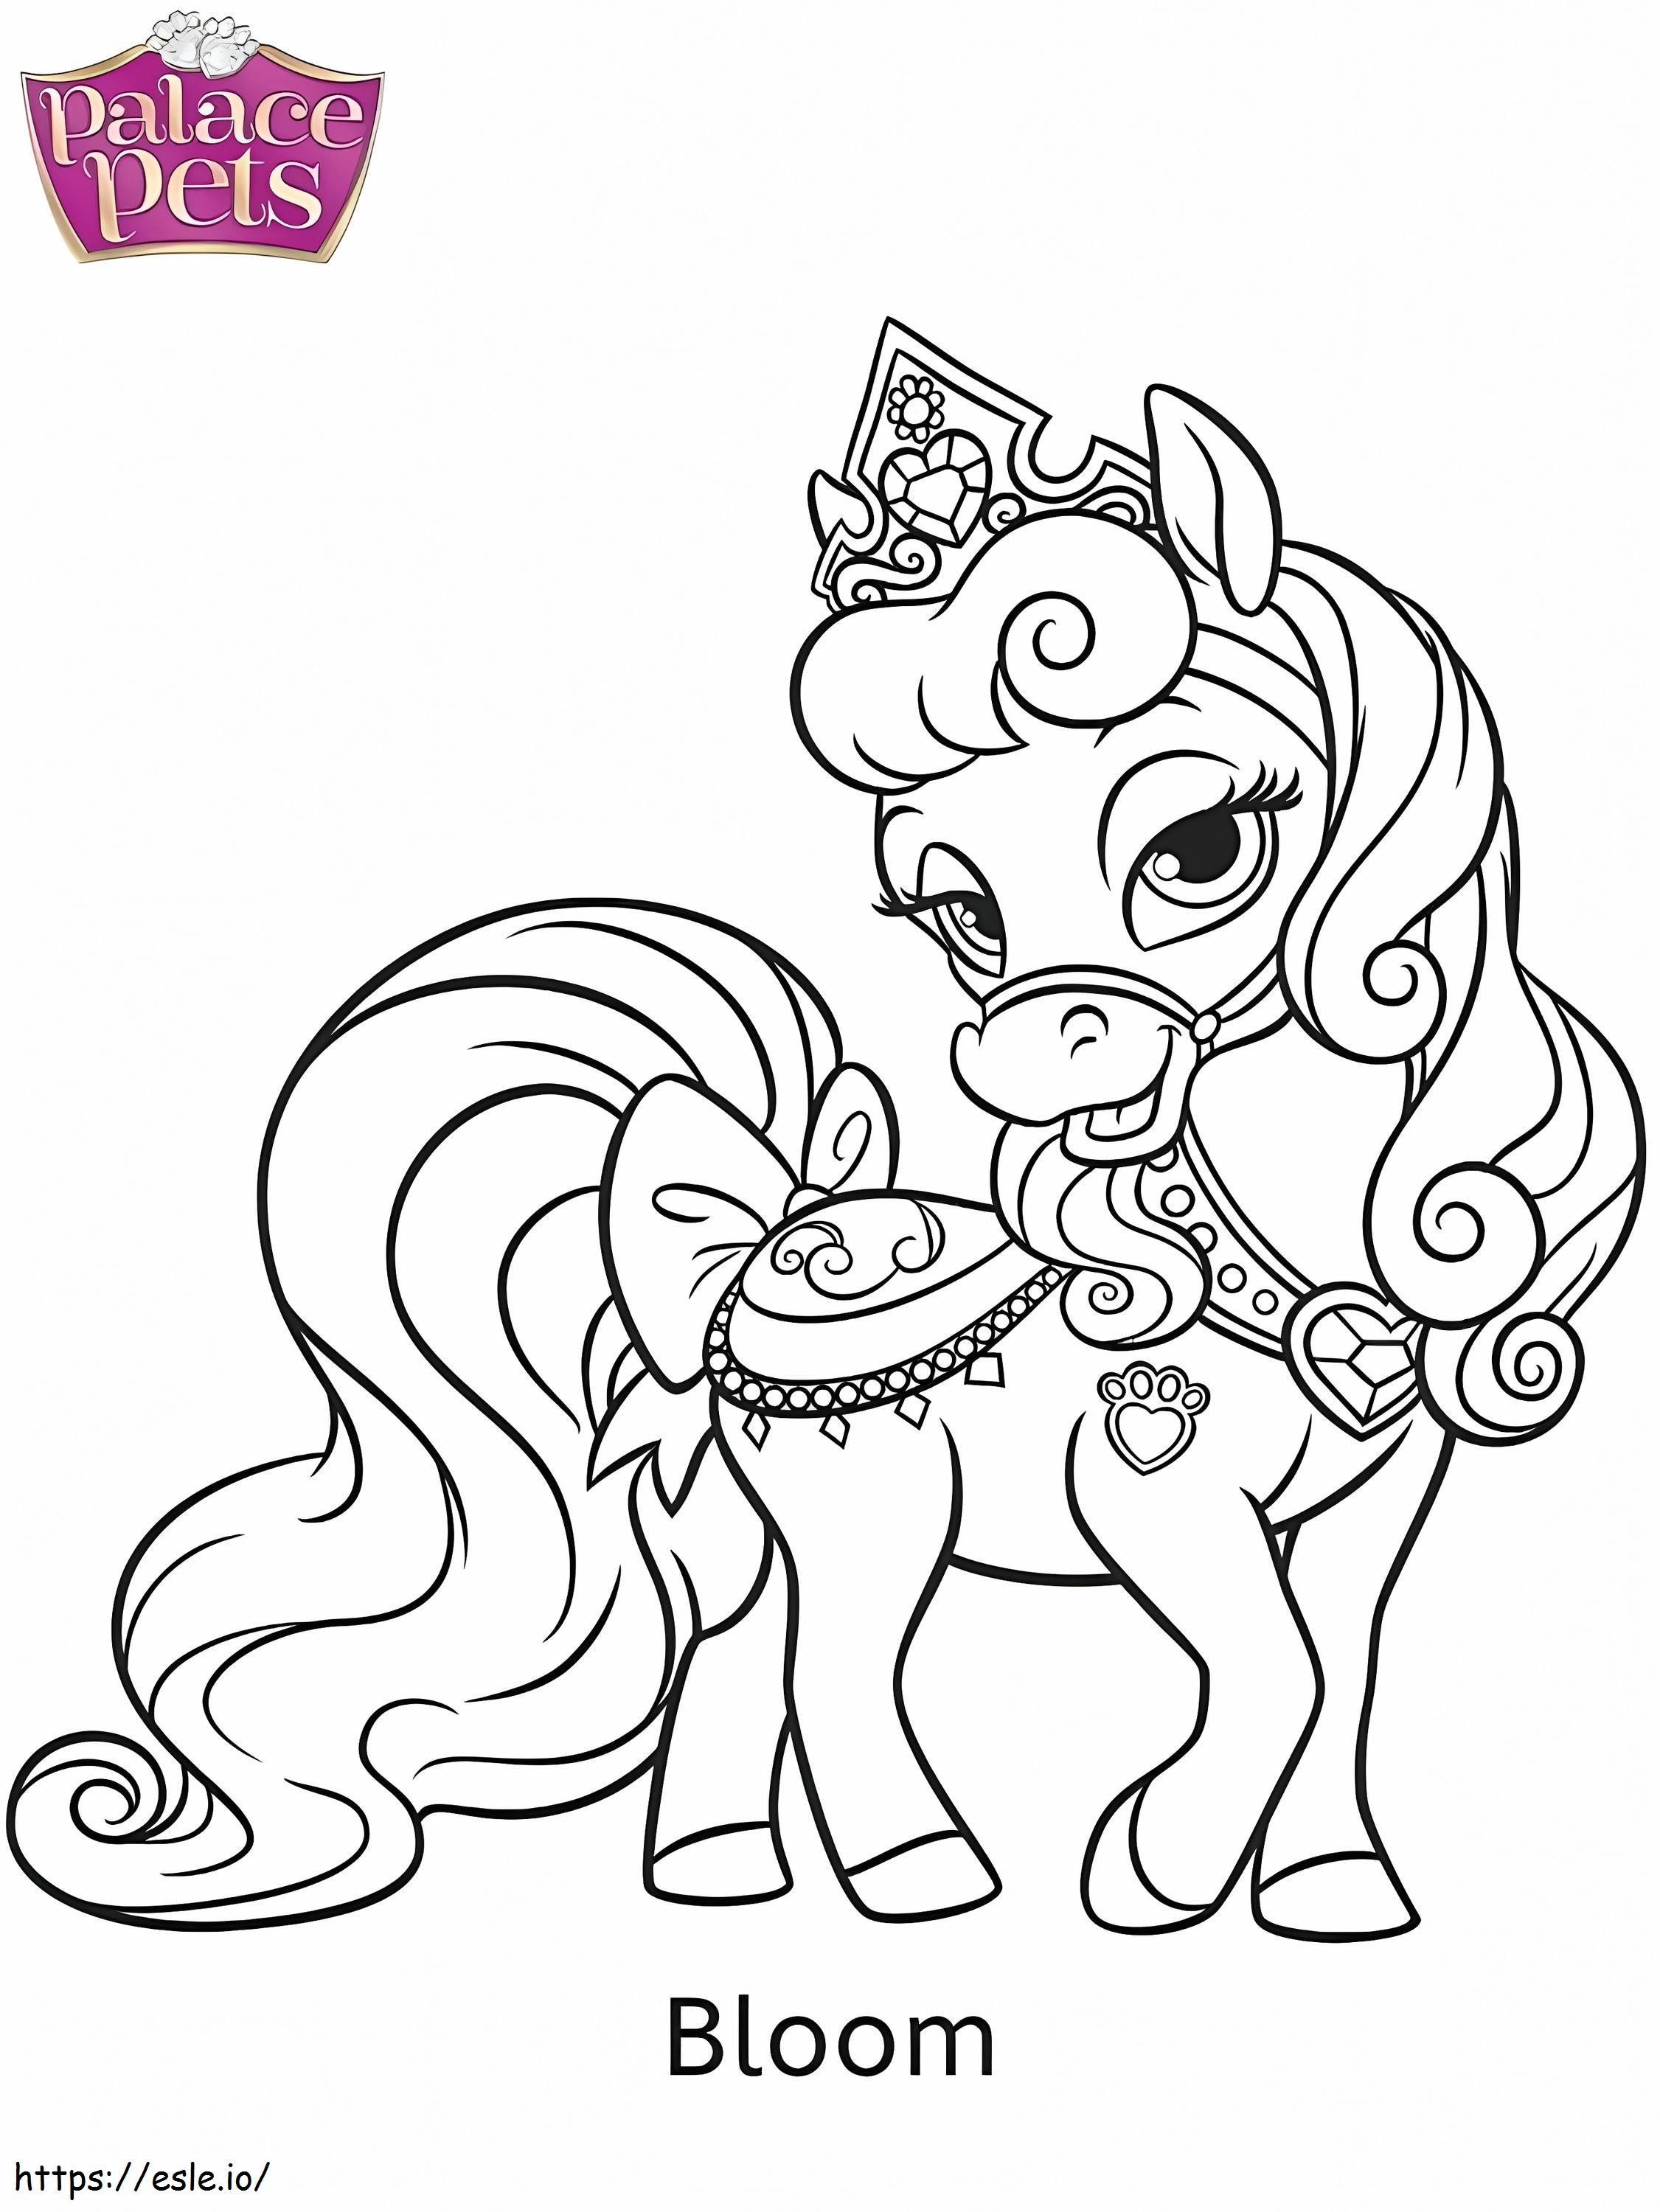 1587025143 Palace Pets Bloom coloring page